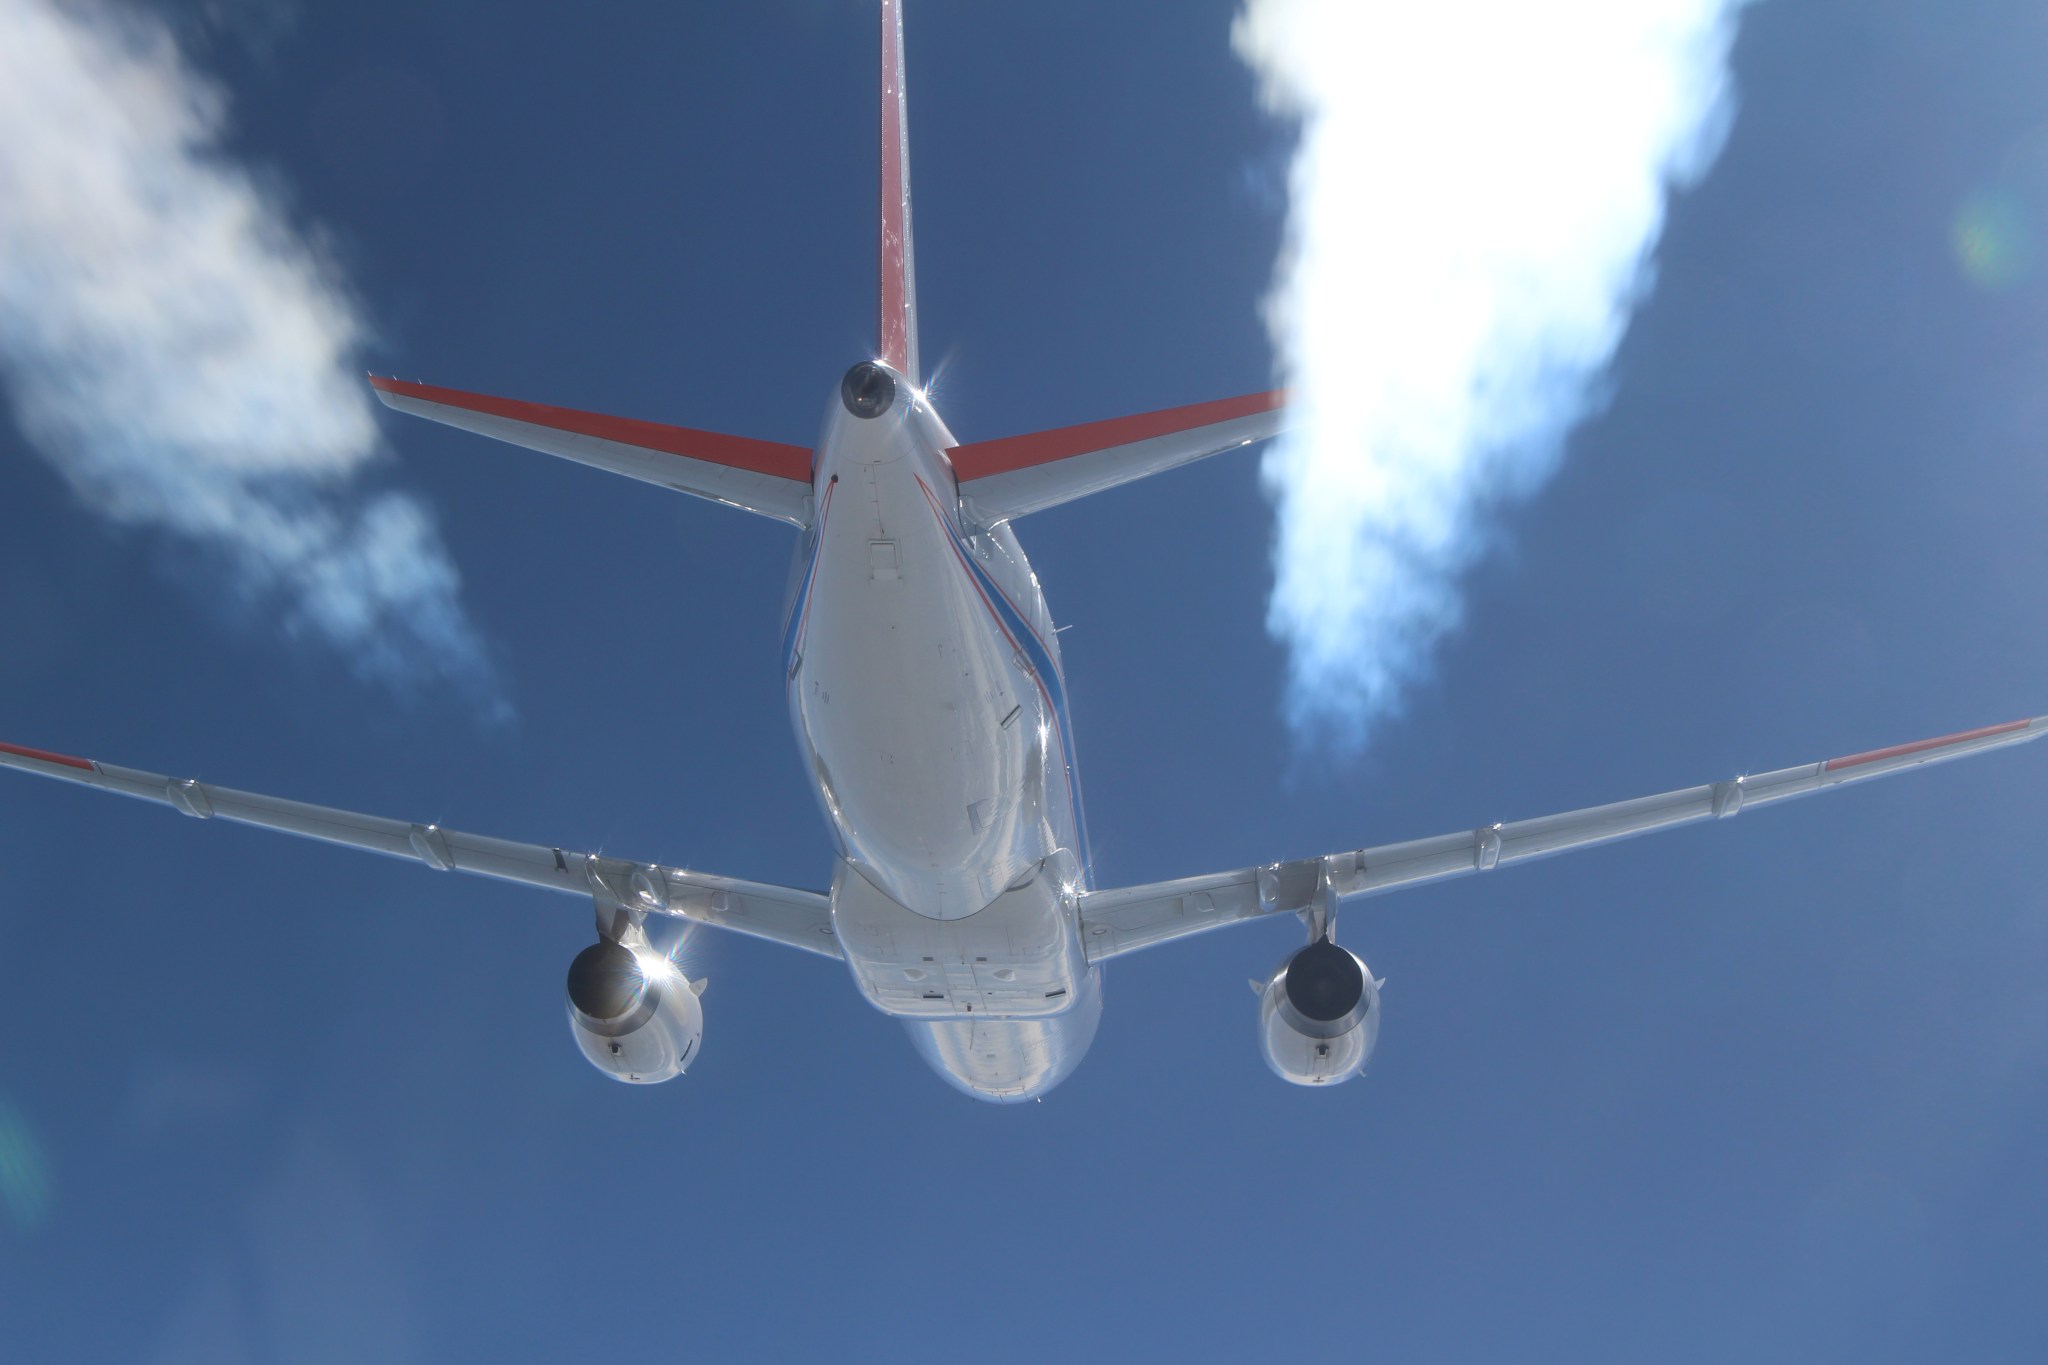 View of an airplane in flight against blue clouds showing contrails.